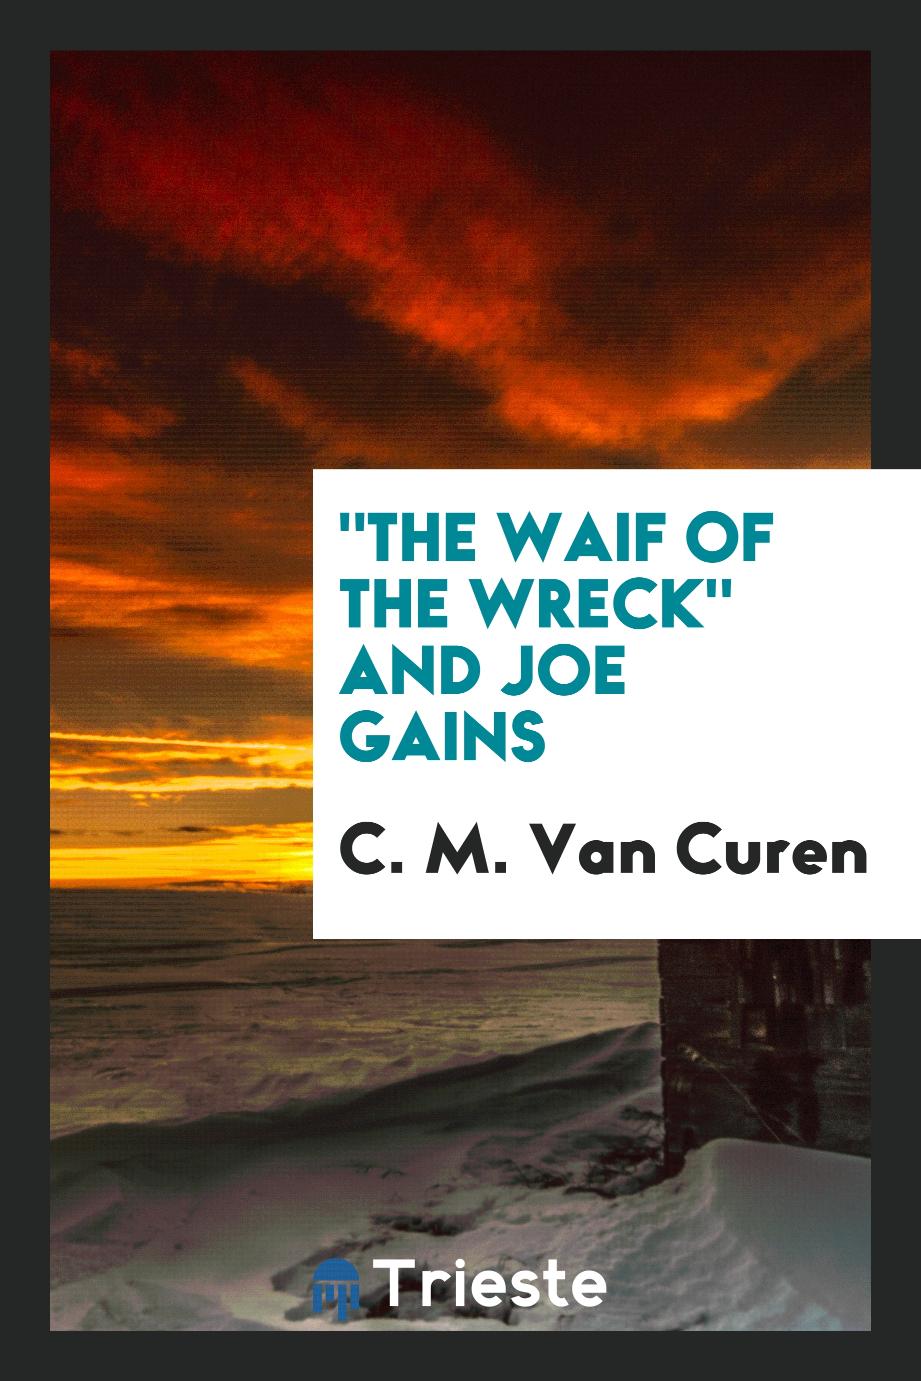 "The Waif of the Wreck" and Joe Gains